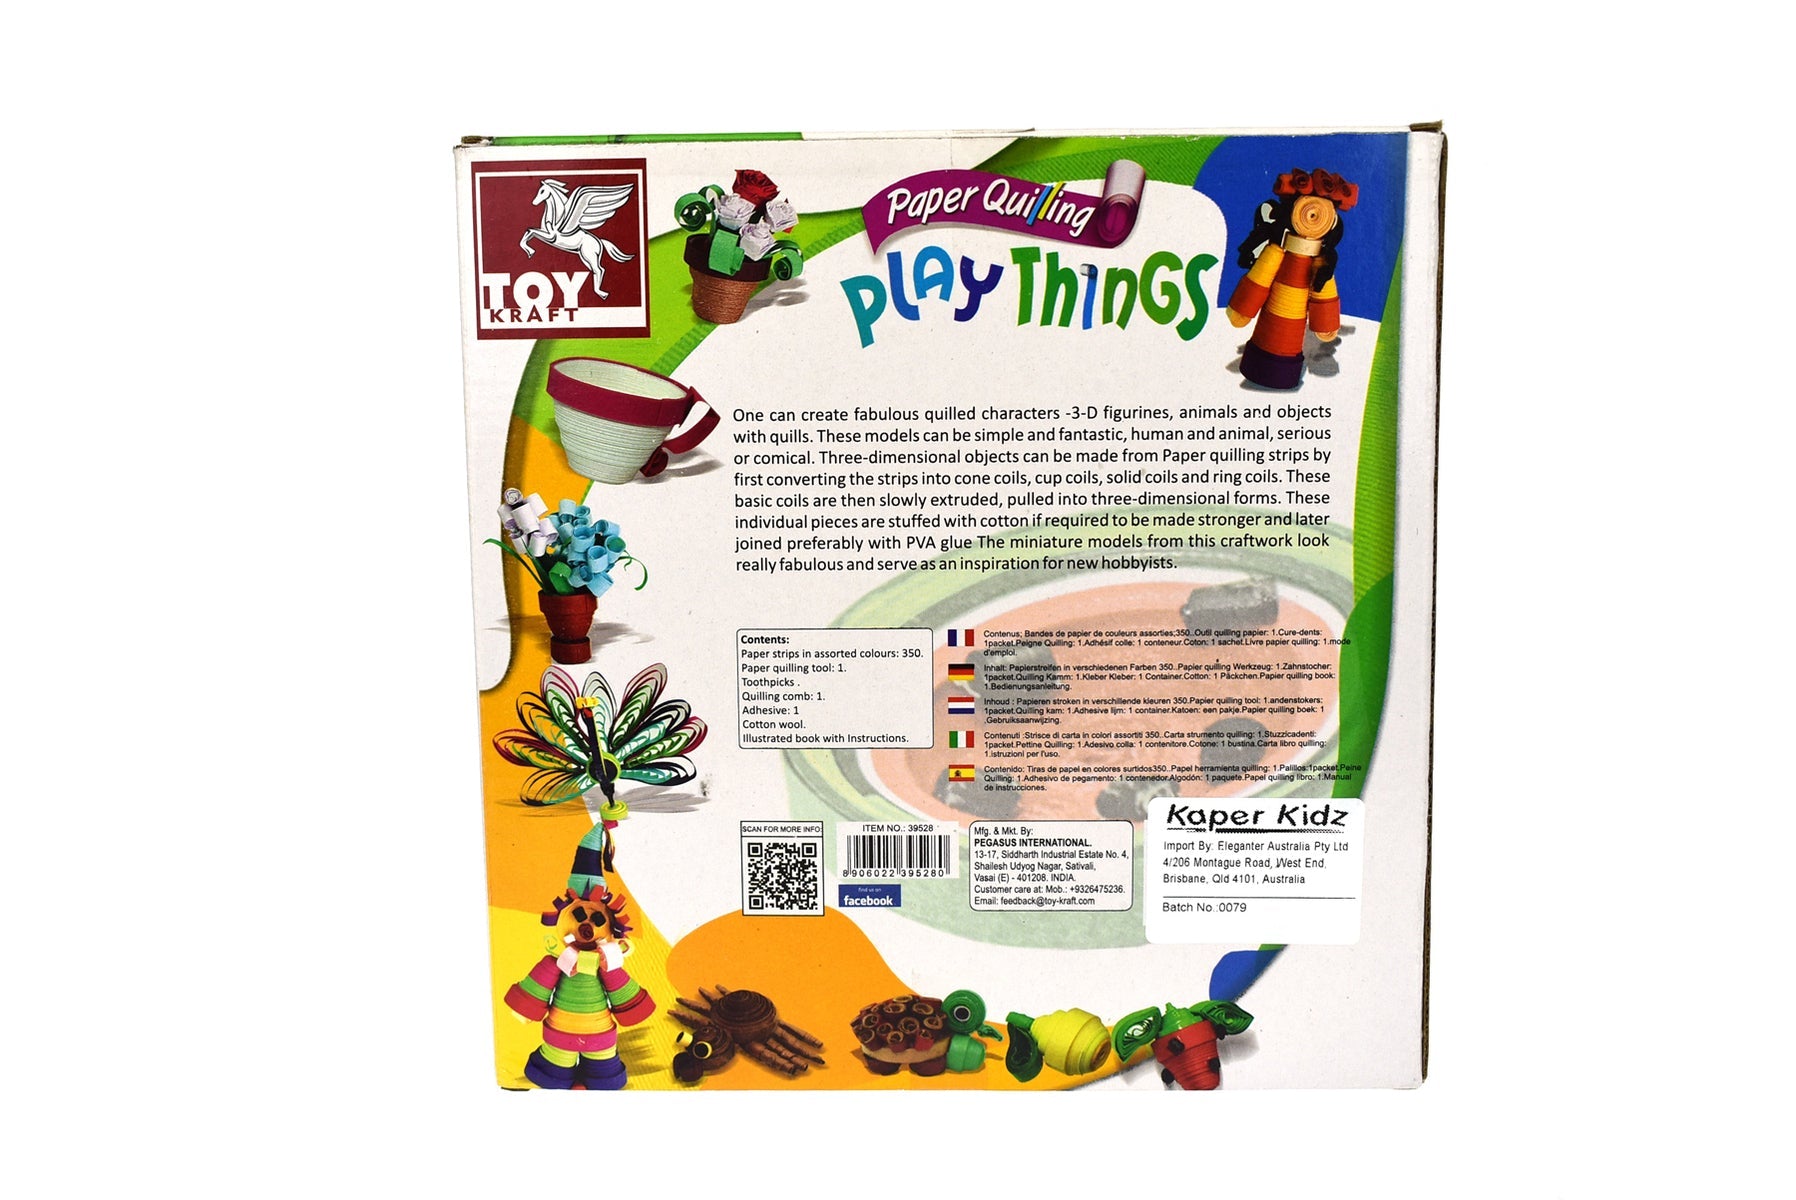 Paper Quilling Play Things Craft Kit